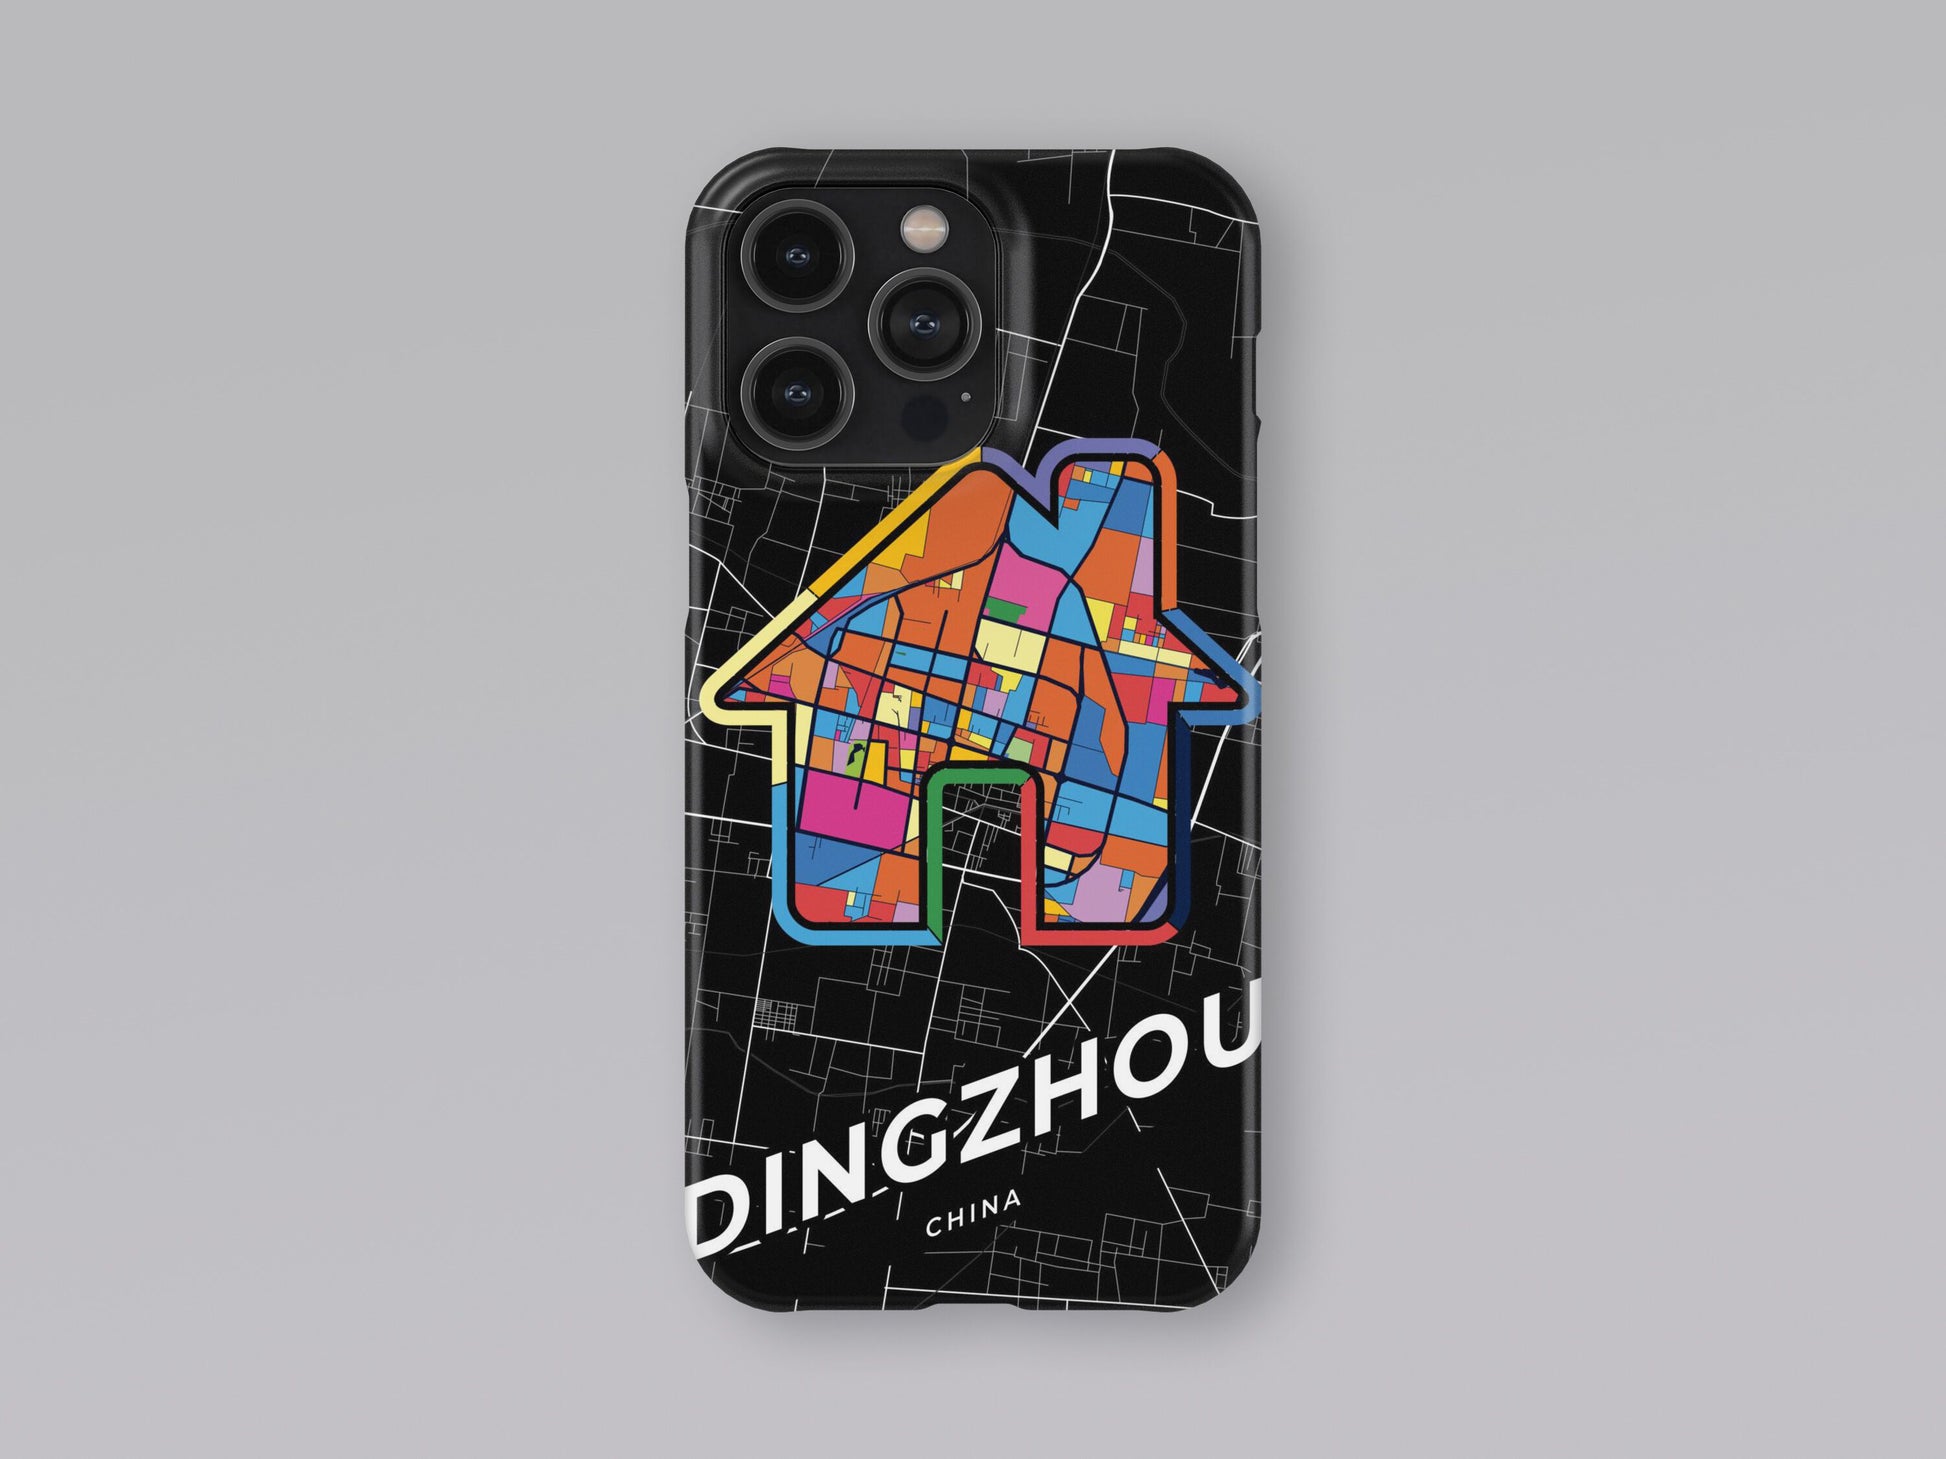 Dingzhou China slim phone case with colorful icon. Birthday, wedding or housewarming gift. Couple match cases. 3